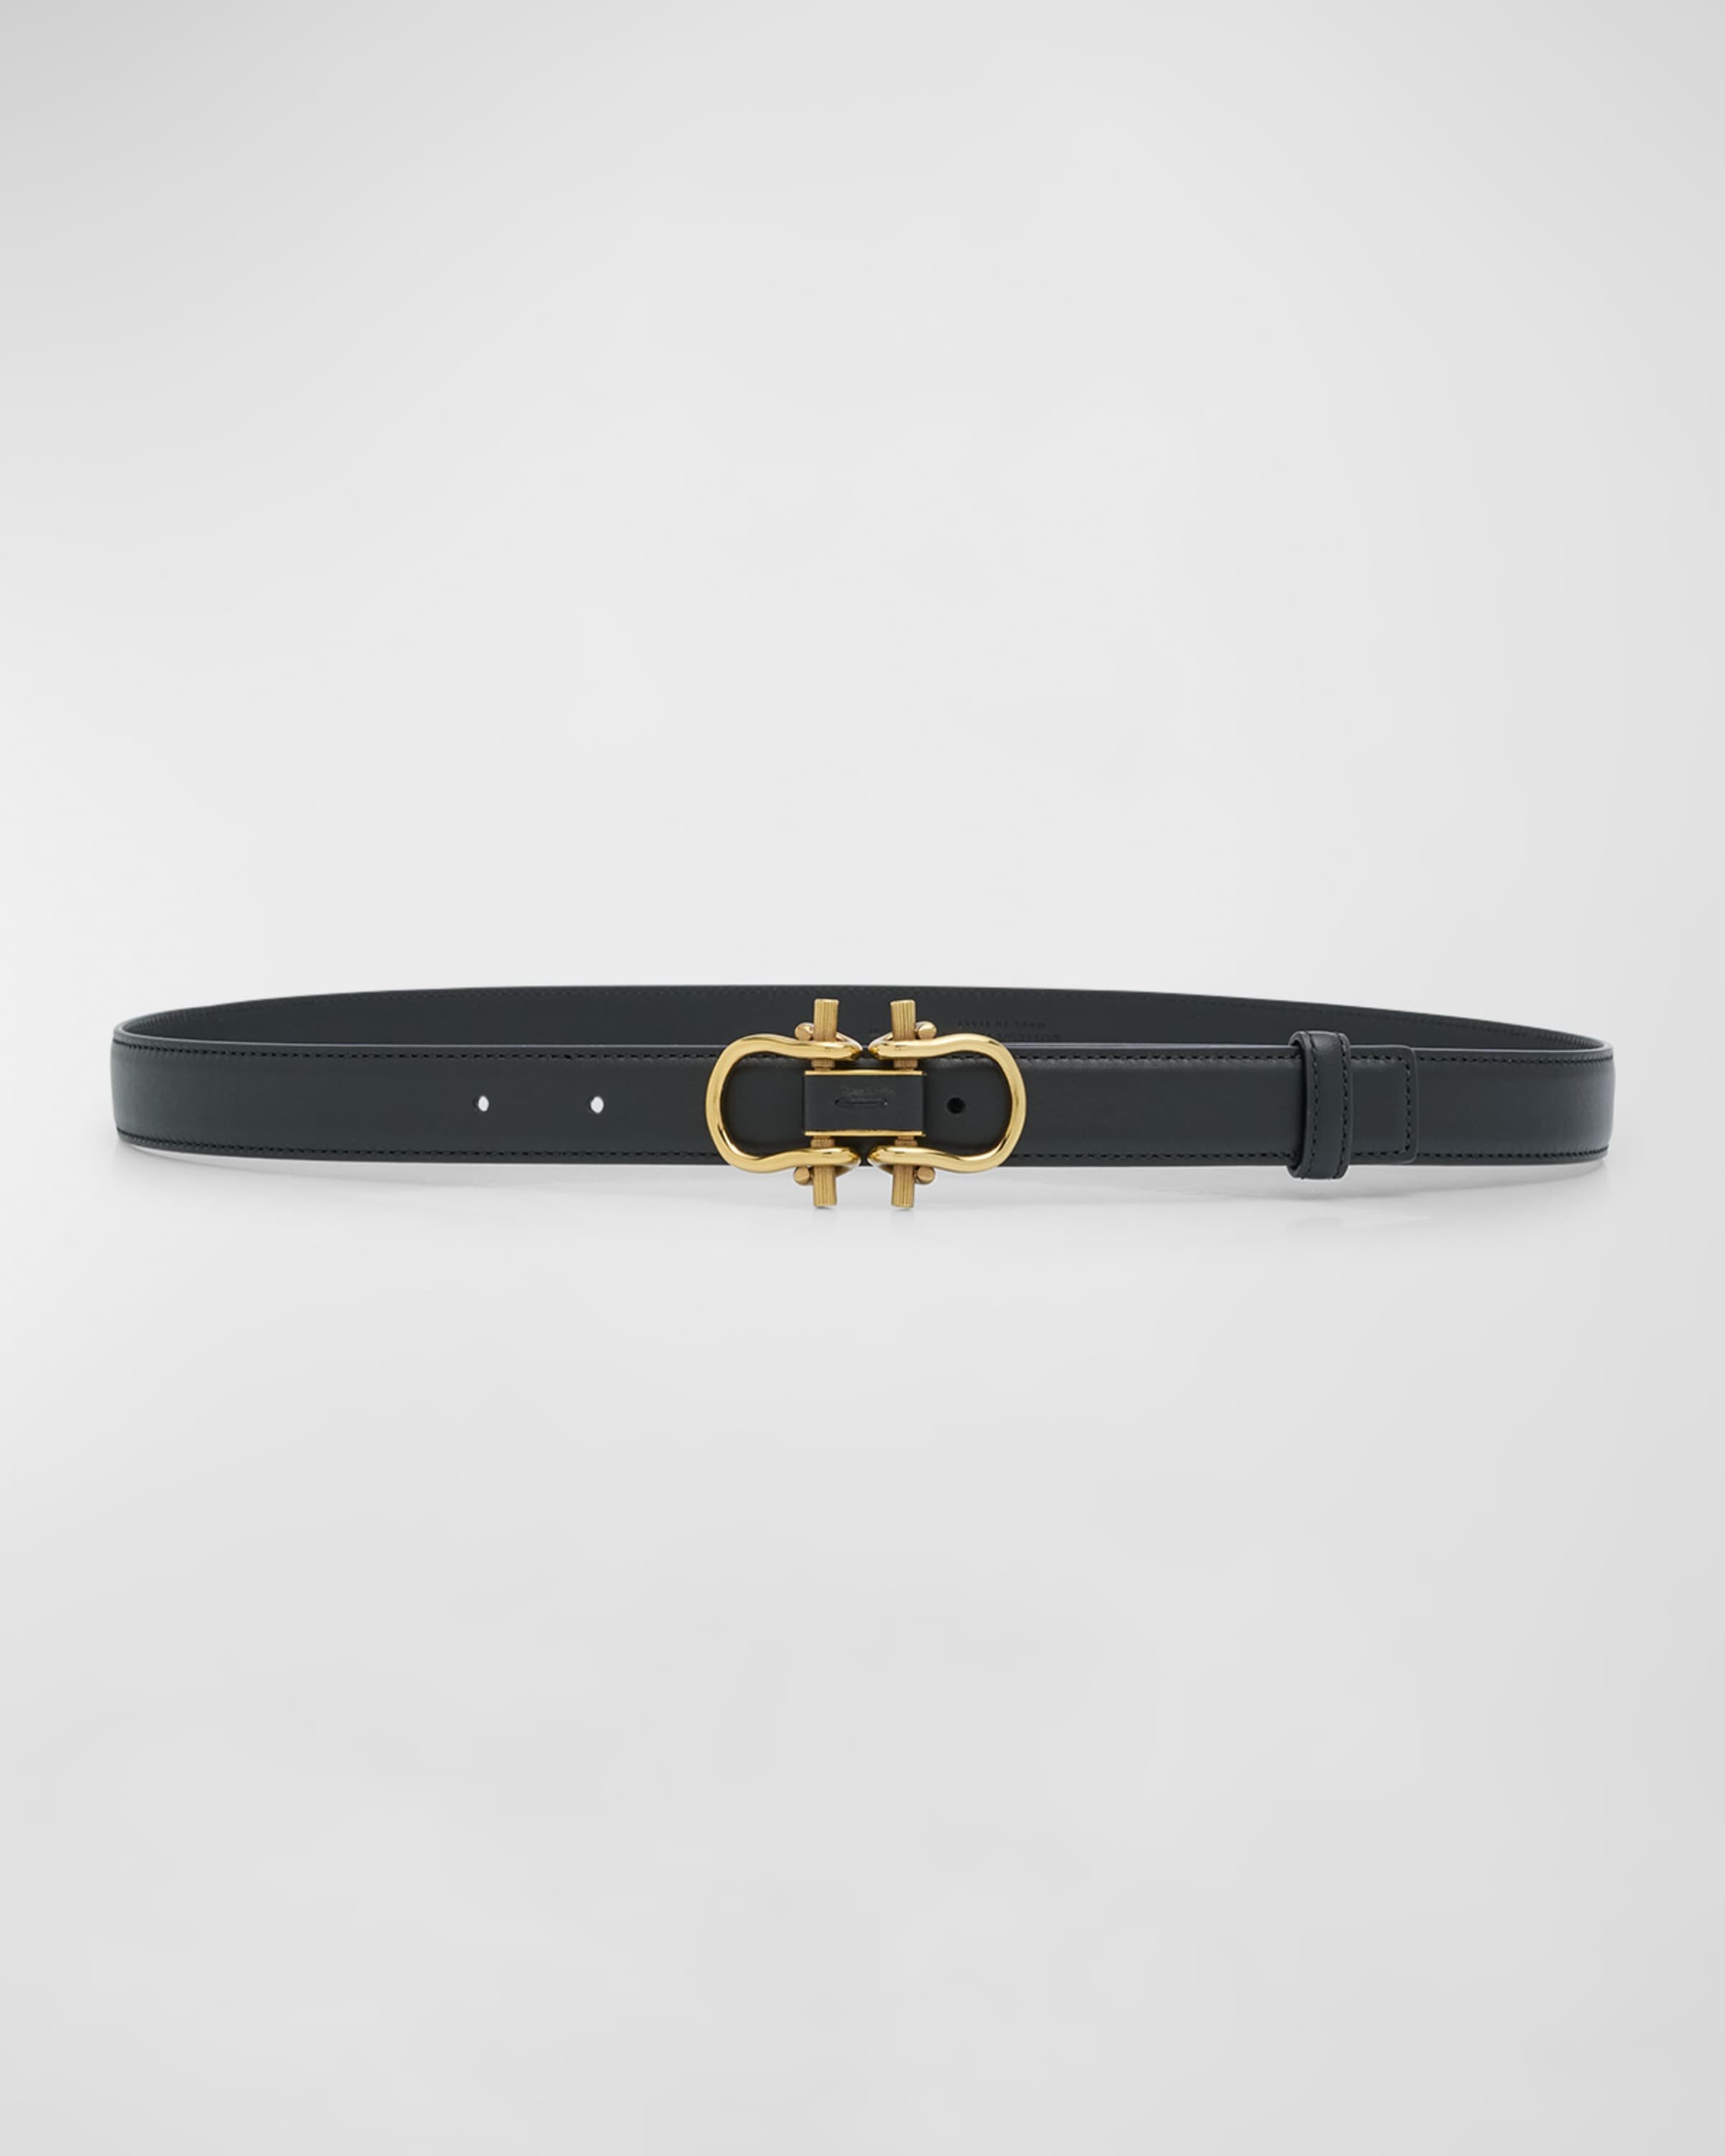 Double Buckled Leather & Brass Belt - 1